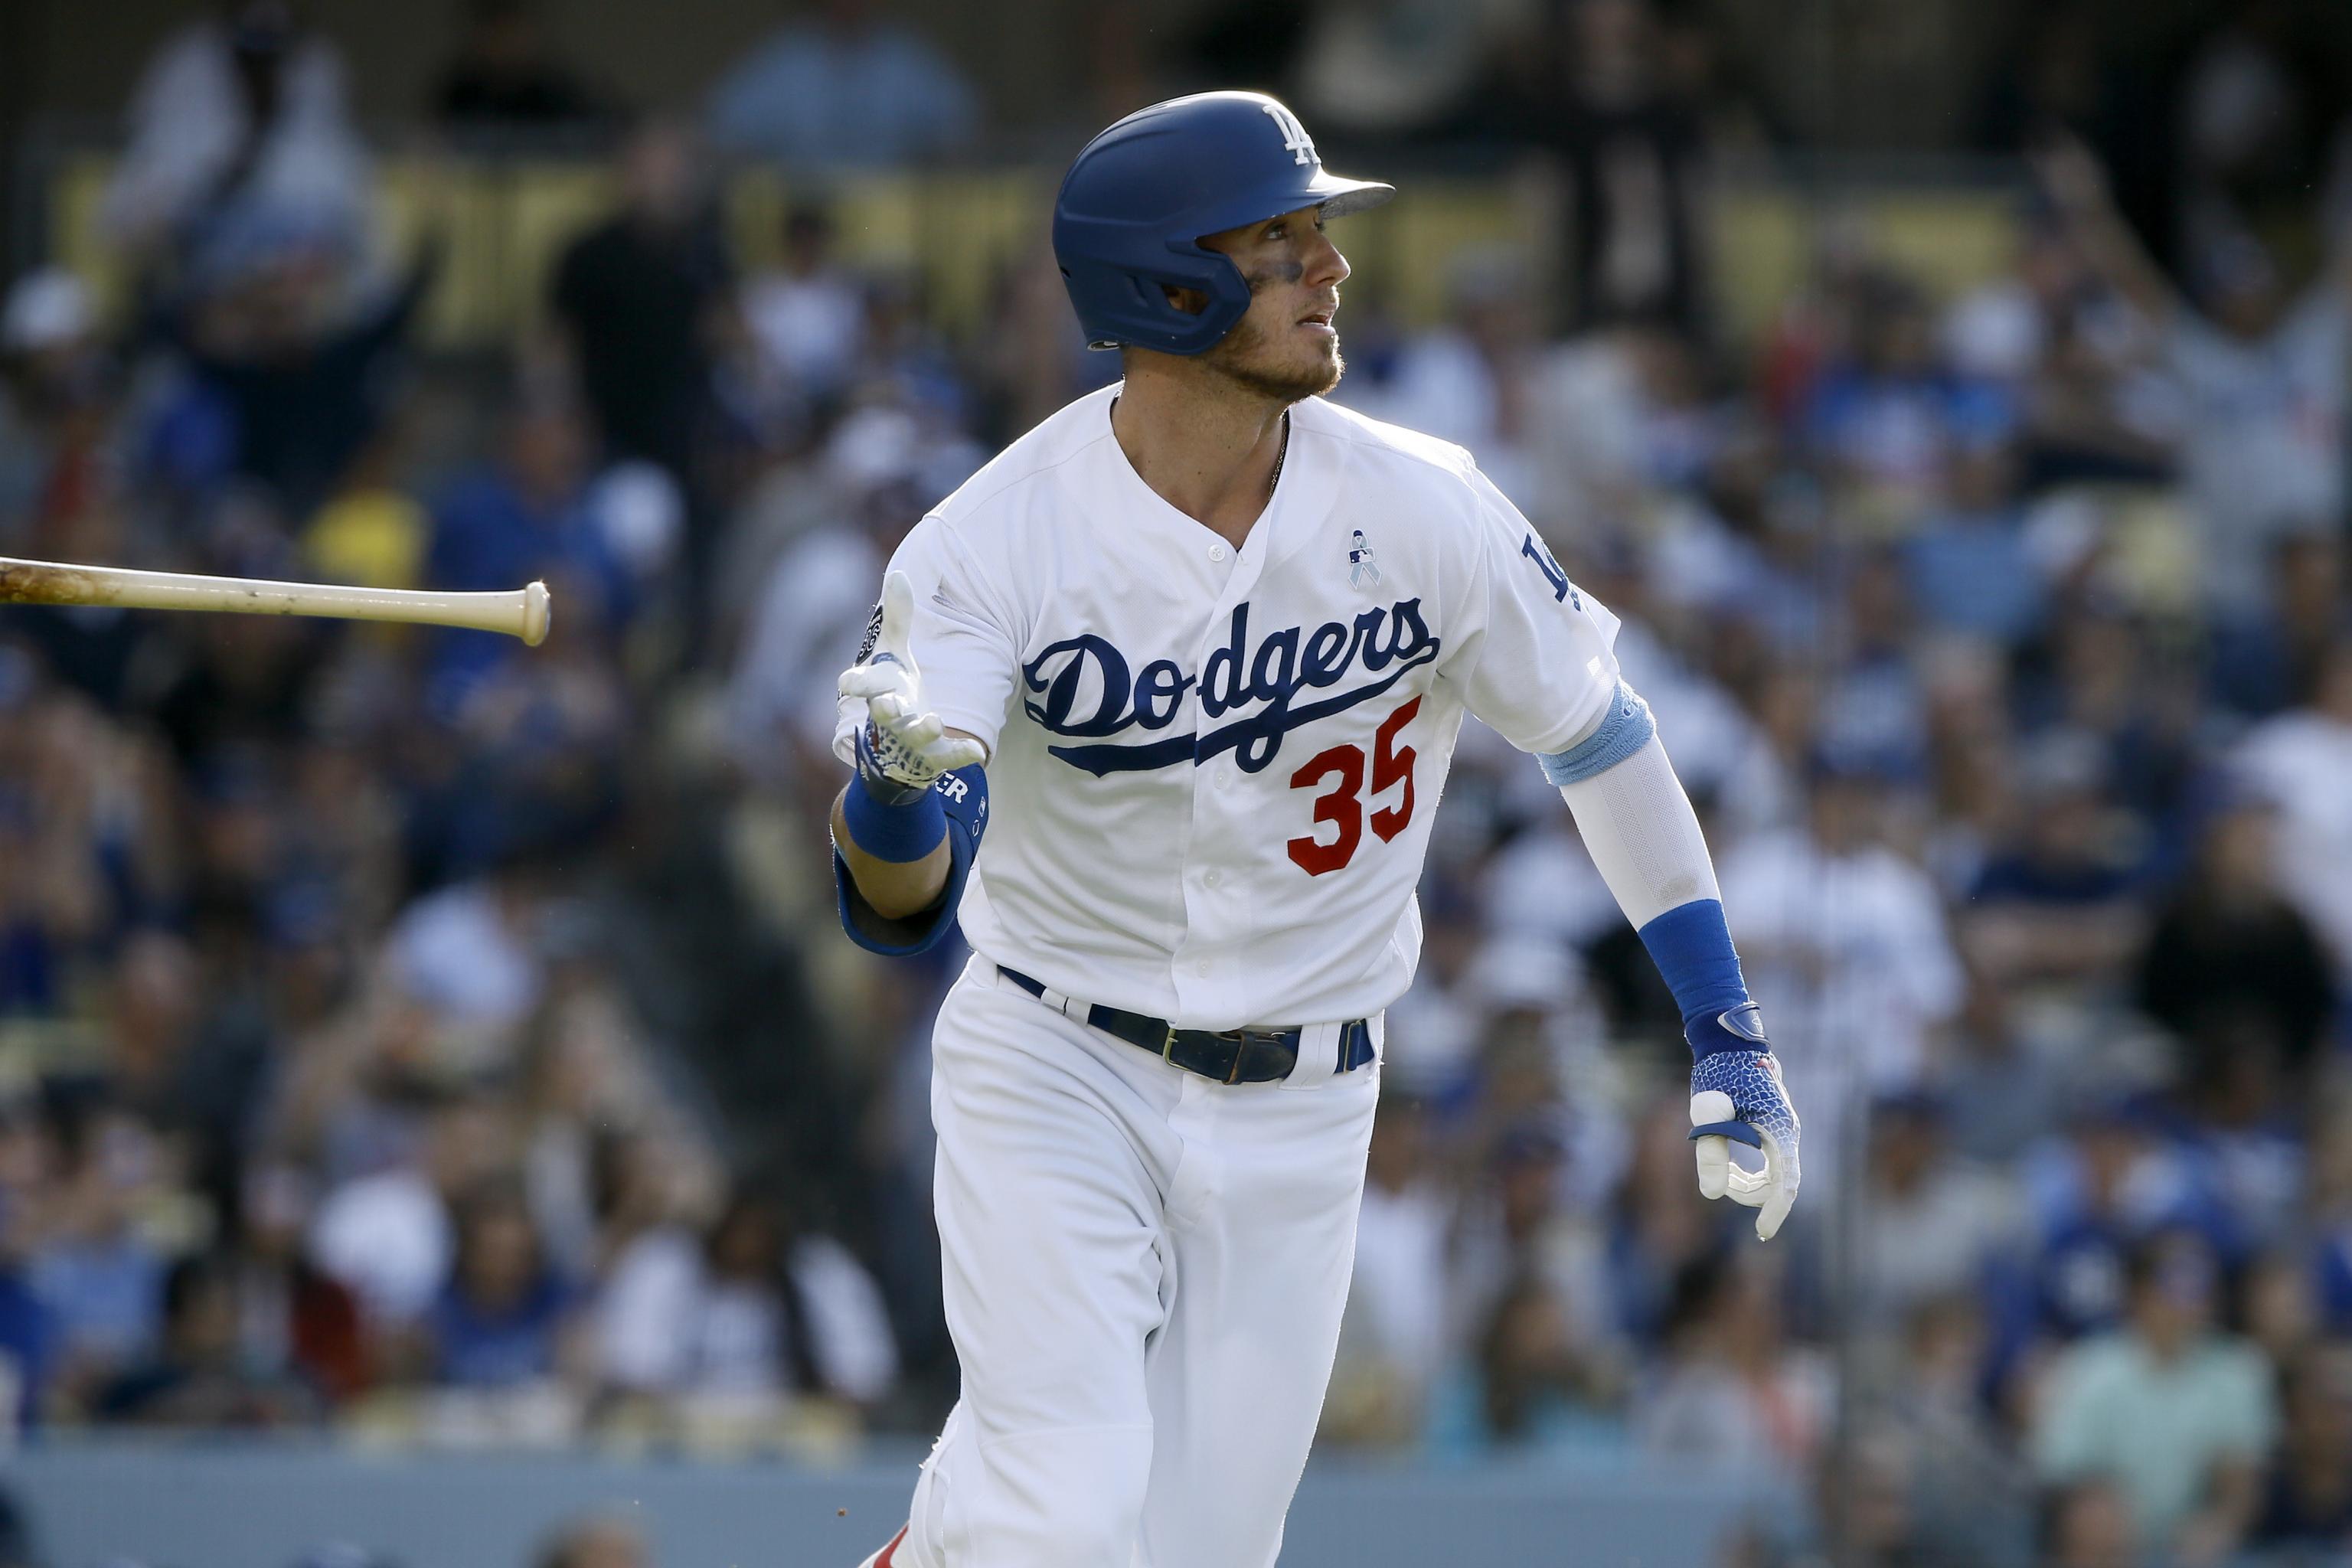 Could Cody Bellinger be next Dodgers rookie in Home Run Derby? – Daily News